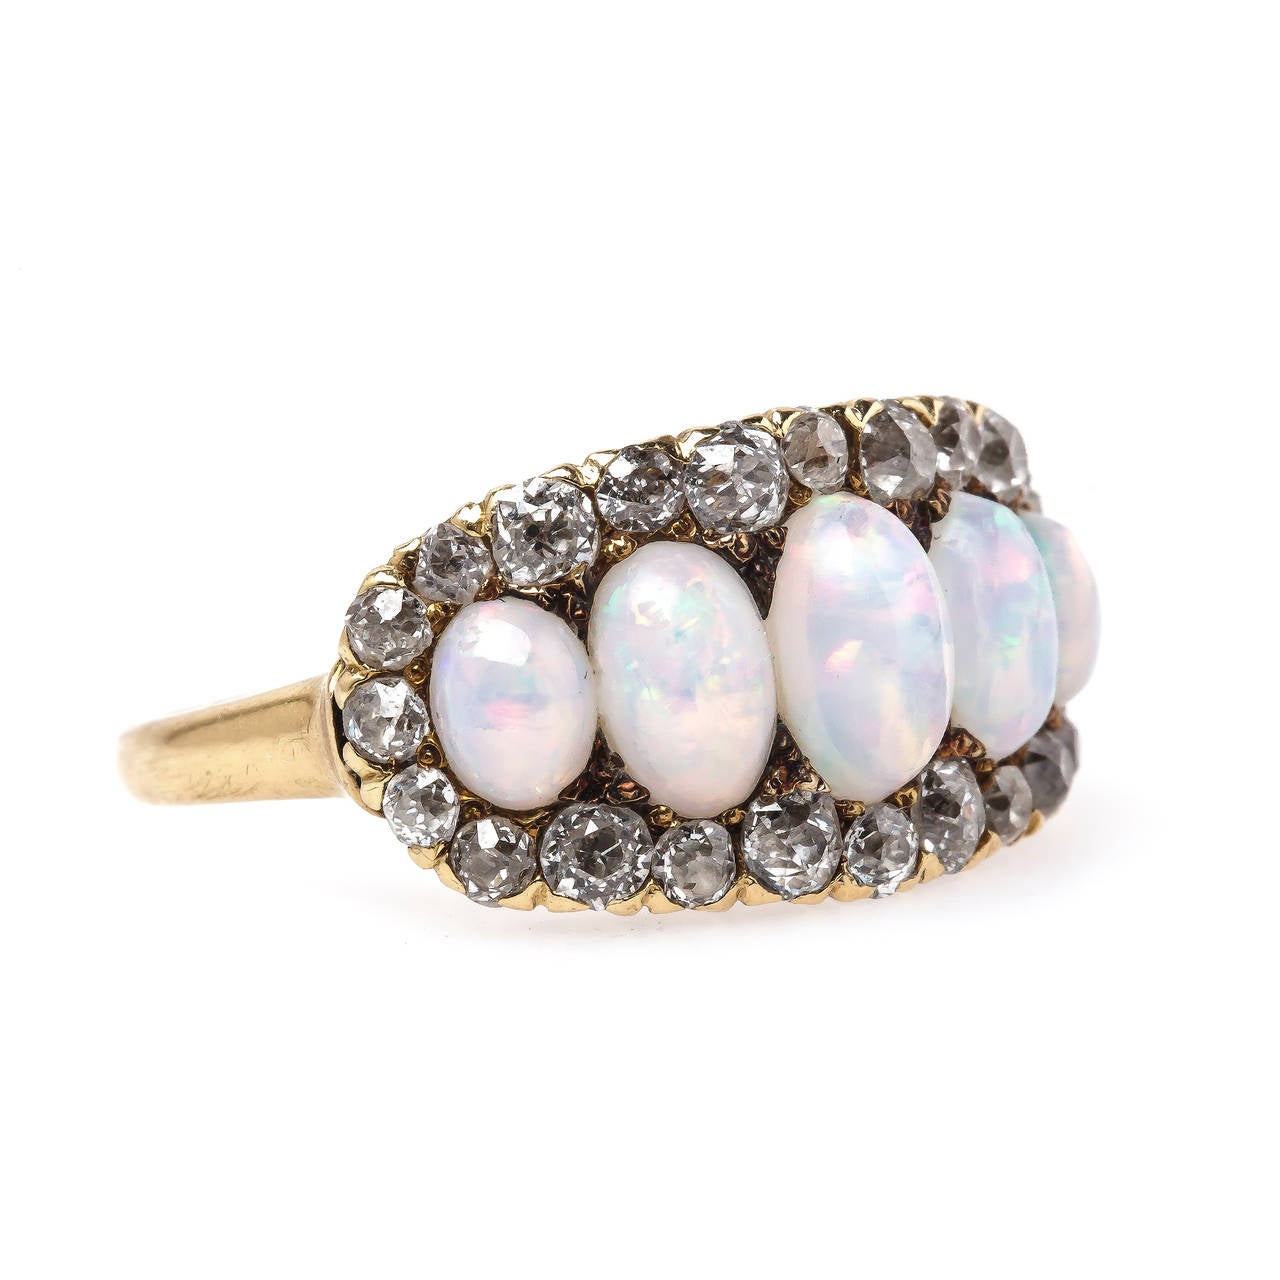 Coachella is a favorite here at T&H! The whimsical authentic Victorian era (circa 1890) 18k yellow gold ring features five beautiful oval opals gauged from 7.10mm x 4.6mm to 4.7mm x 3.5mm displaying a beautiful rainbow play of color in each. The